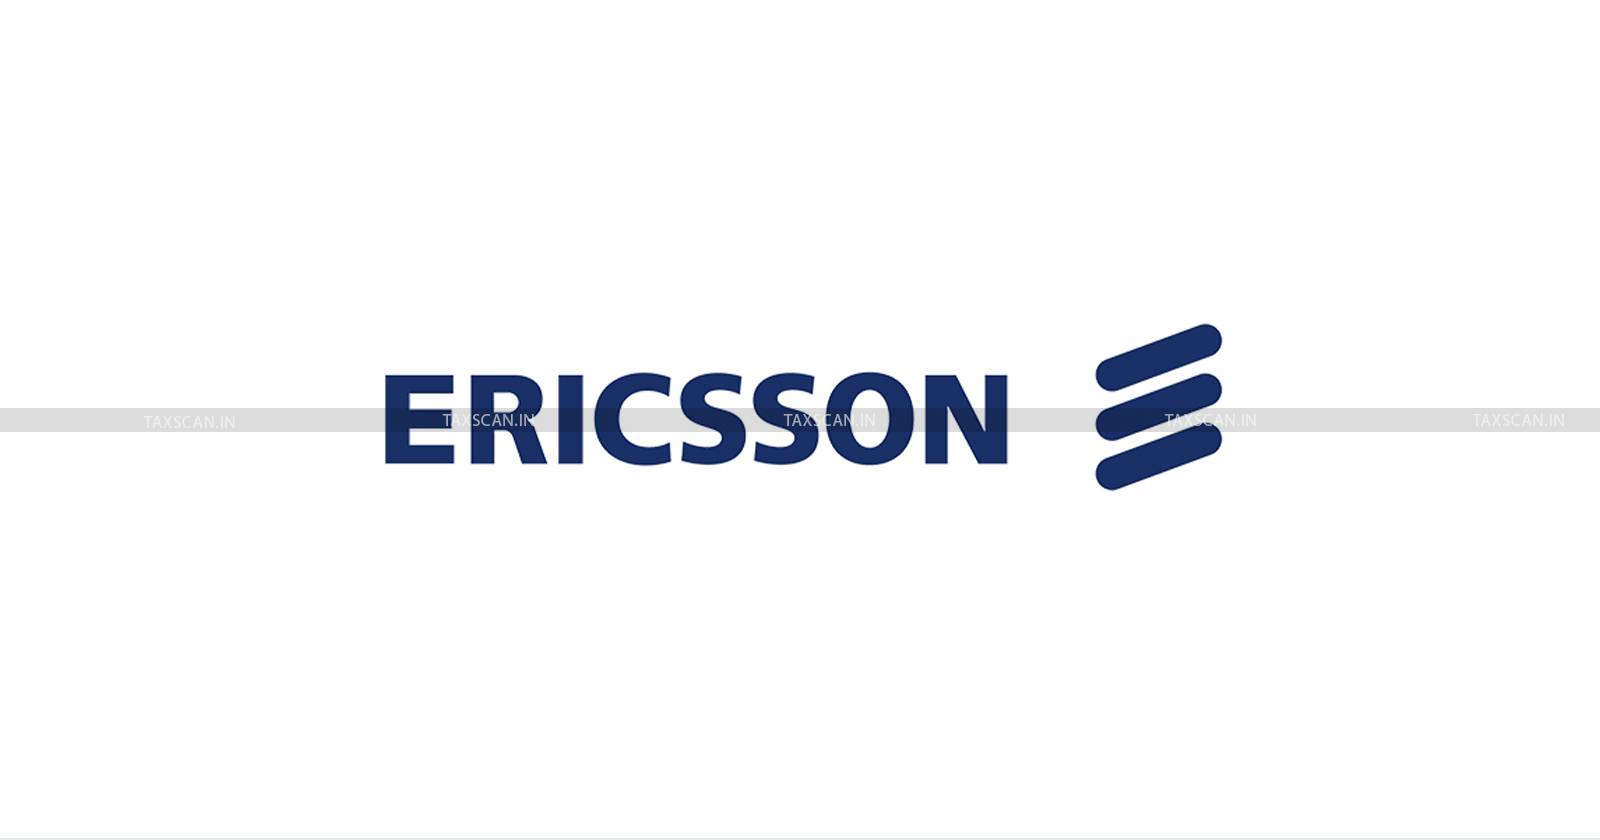 CESTAT - CESTAT Chandigarh - Input Tax Credit - Ericsson India Tax Case - Service from Foreign Service Provider - CESTAT Decision on Ericsson India - Tax News - TAXSCAN